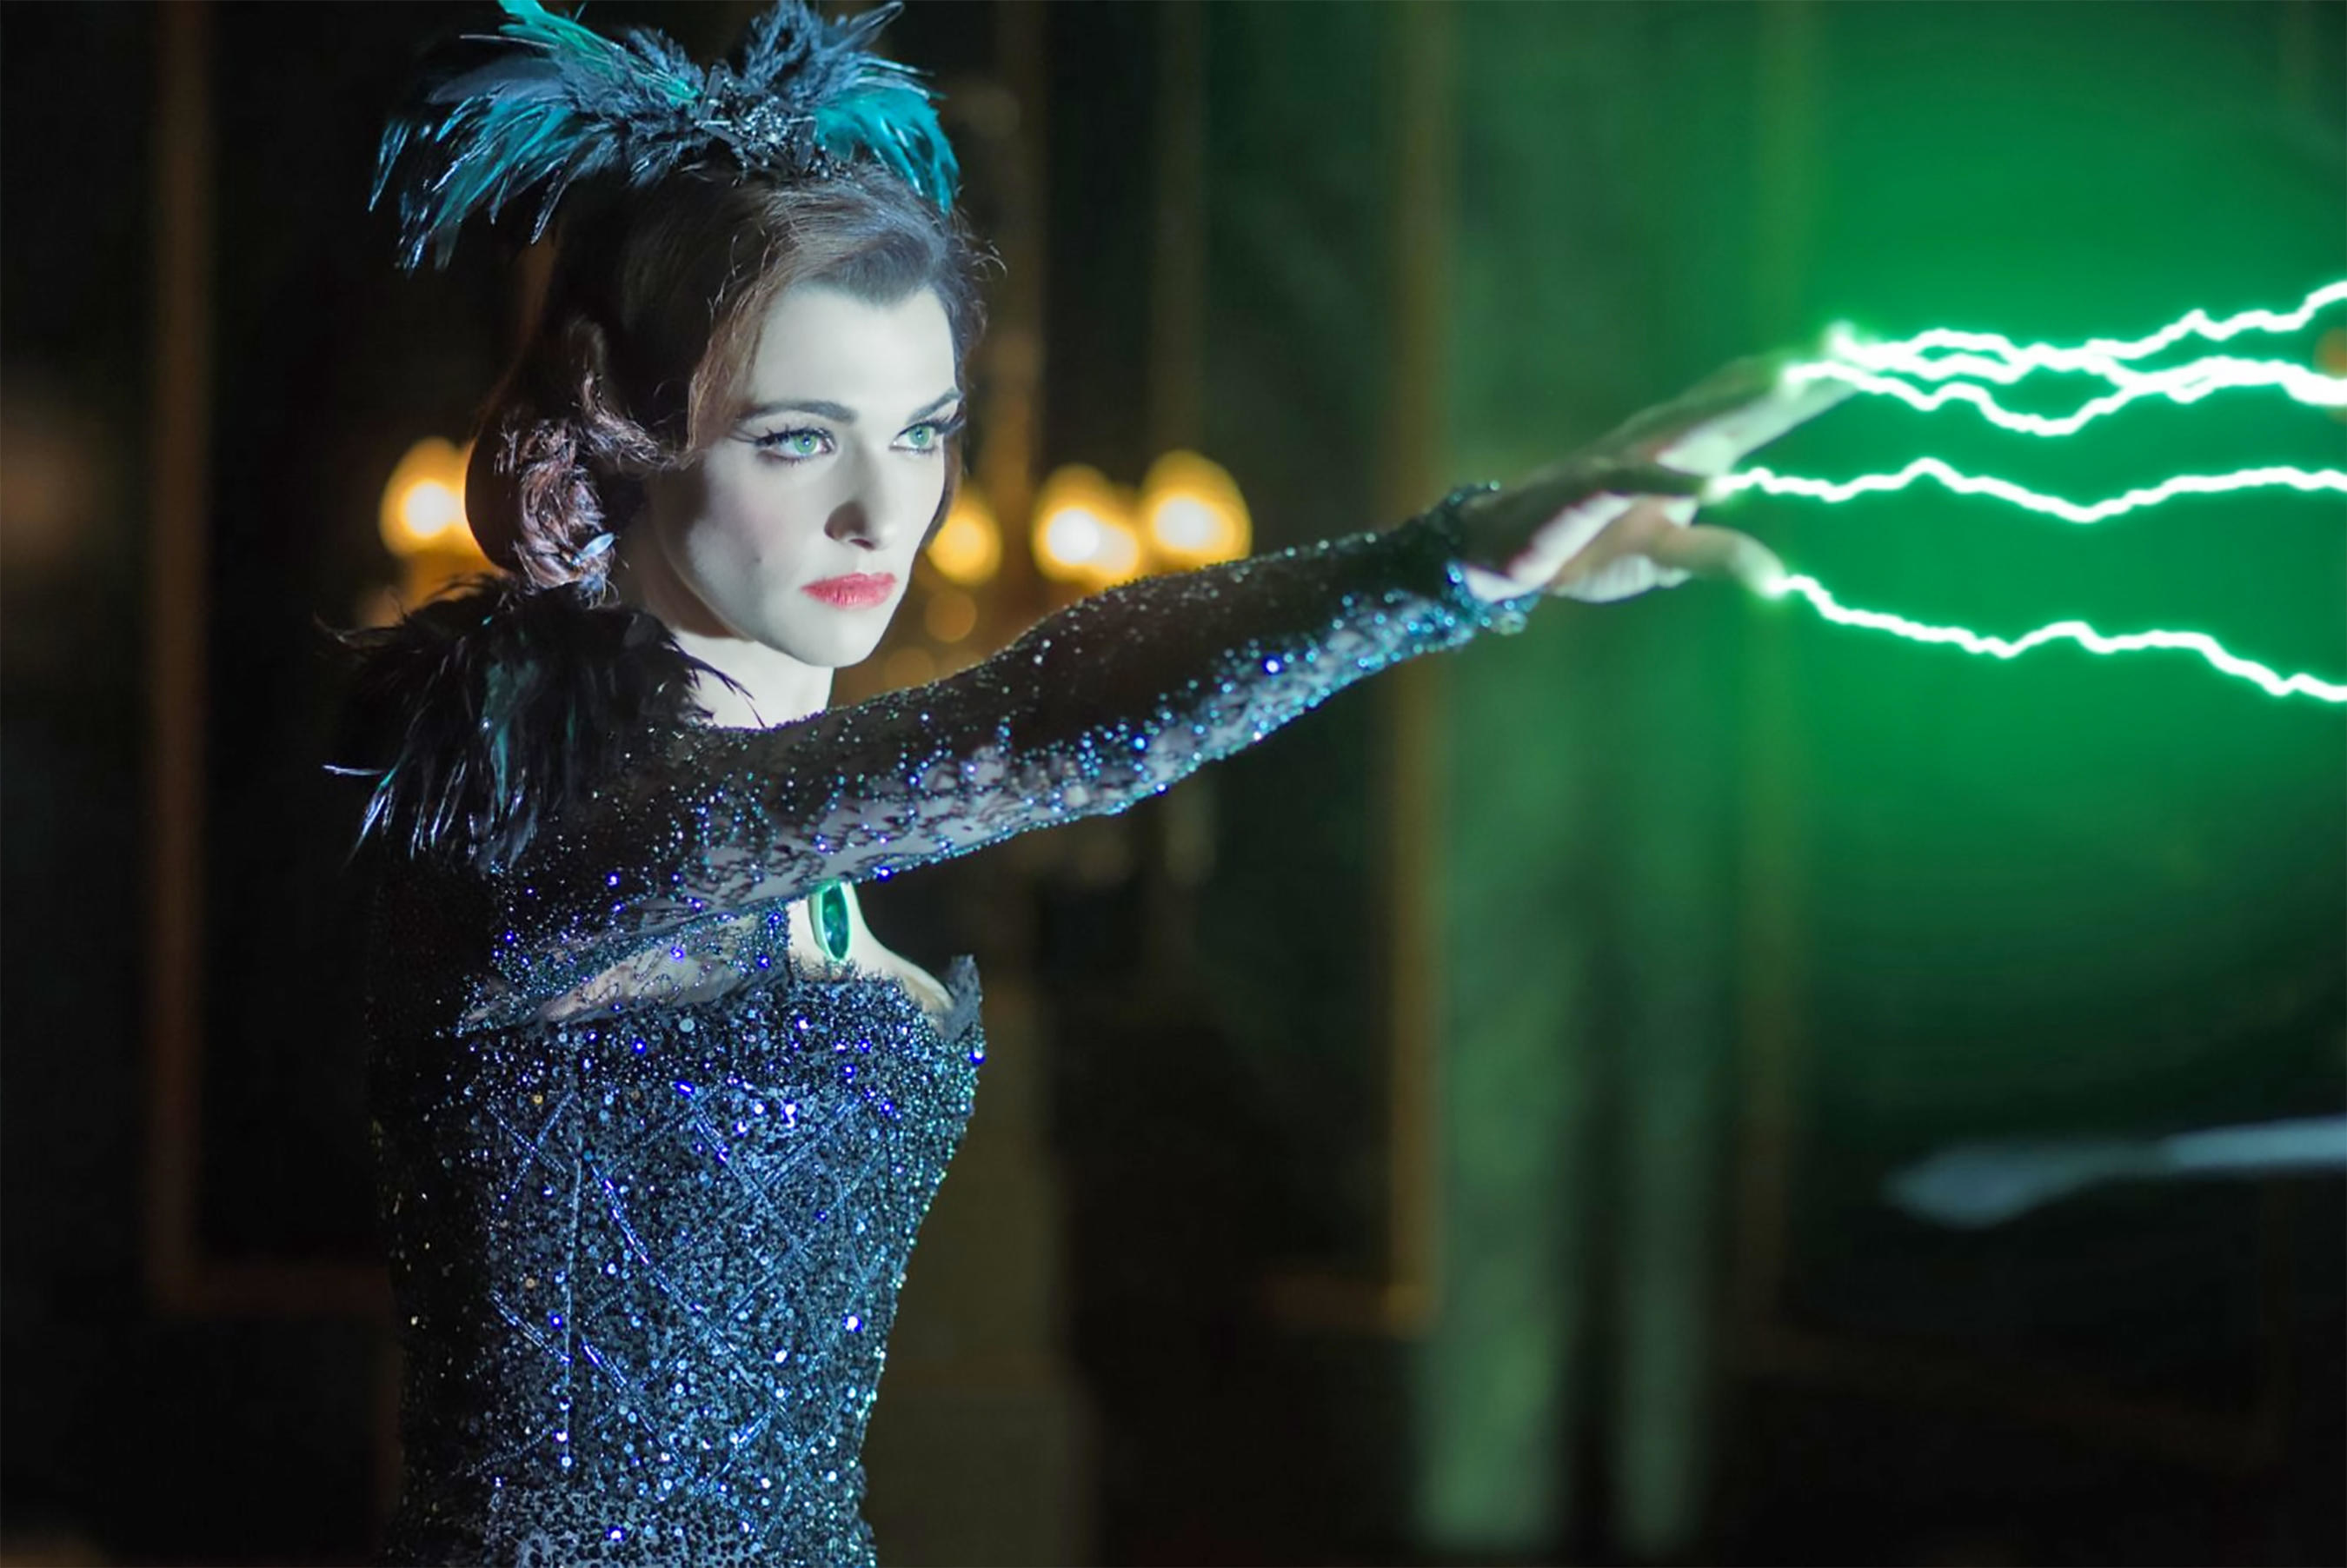 Rachel Weisz in “Oz, the Great and Powerful”